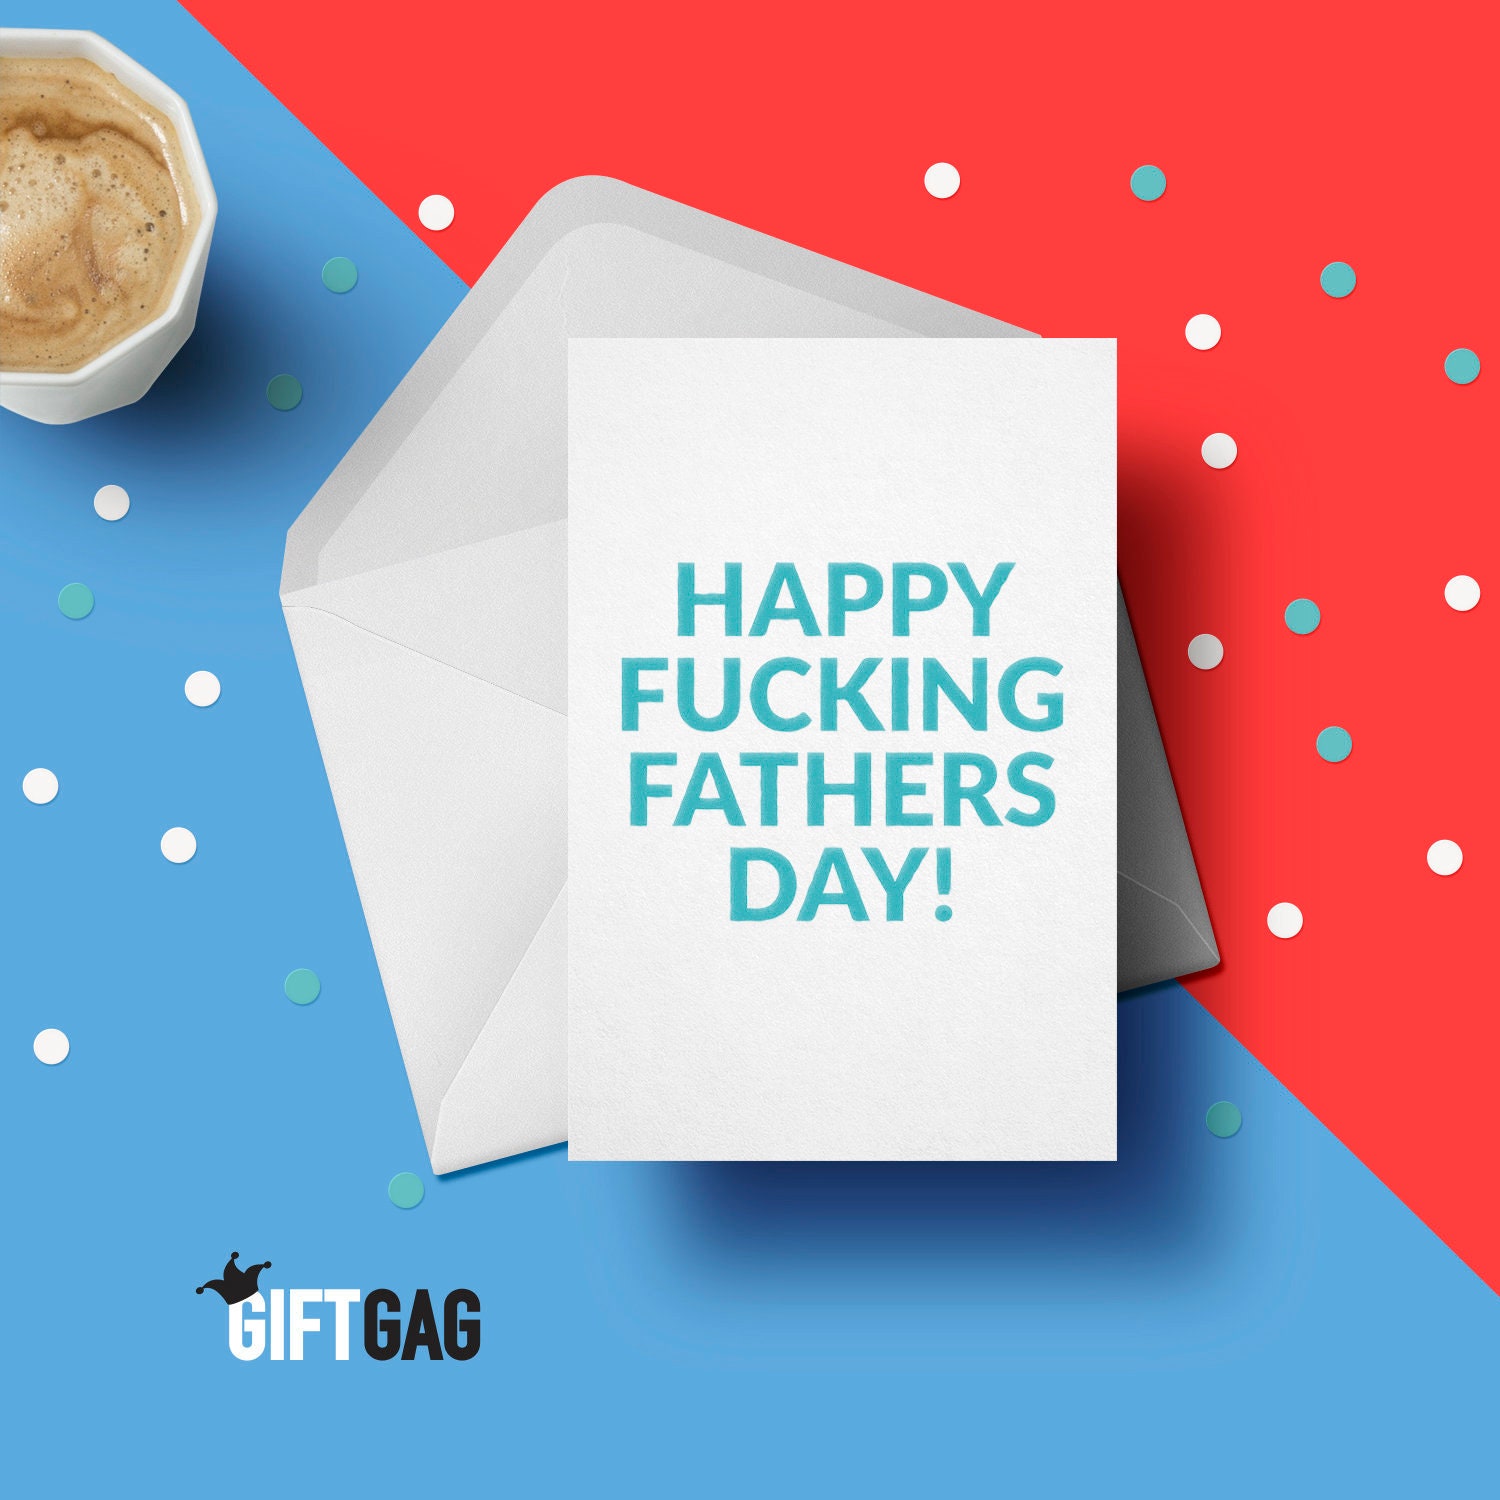 Happy Fucking Fathers Day Greeting Card Funny and Rude picture